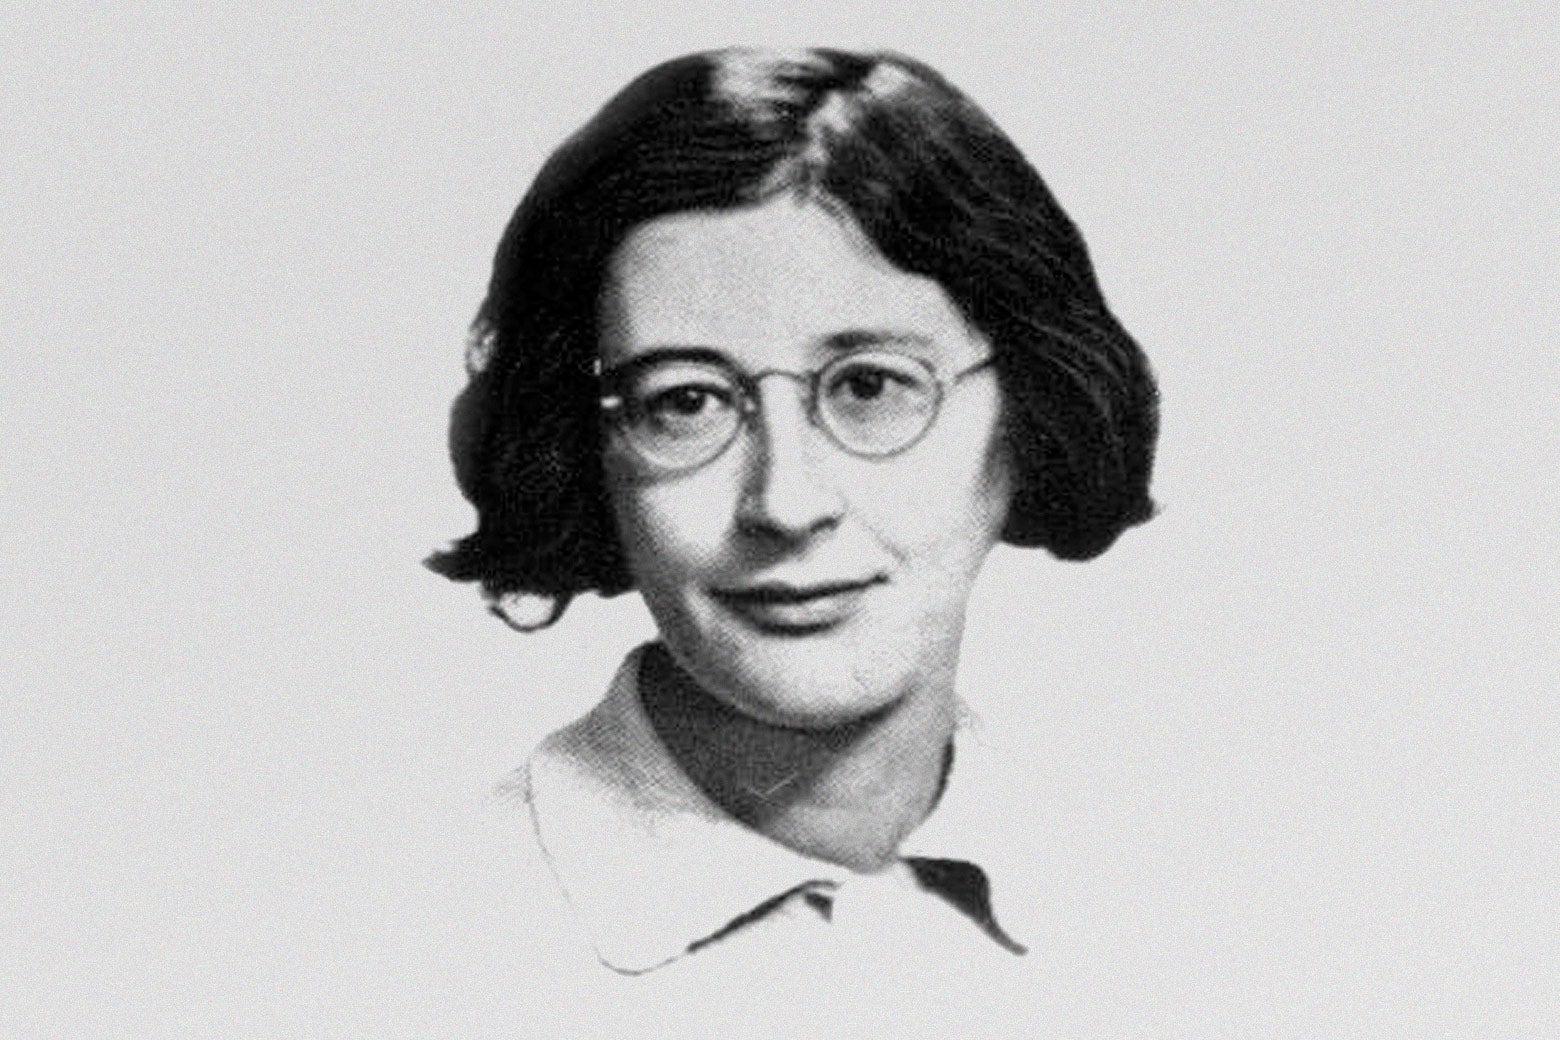 Black and white portrait of Simone Weil